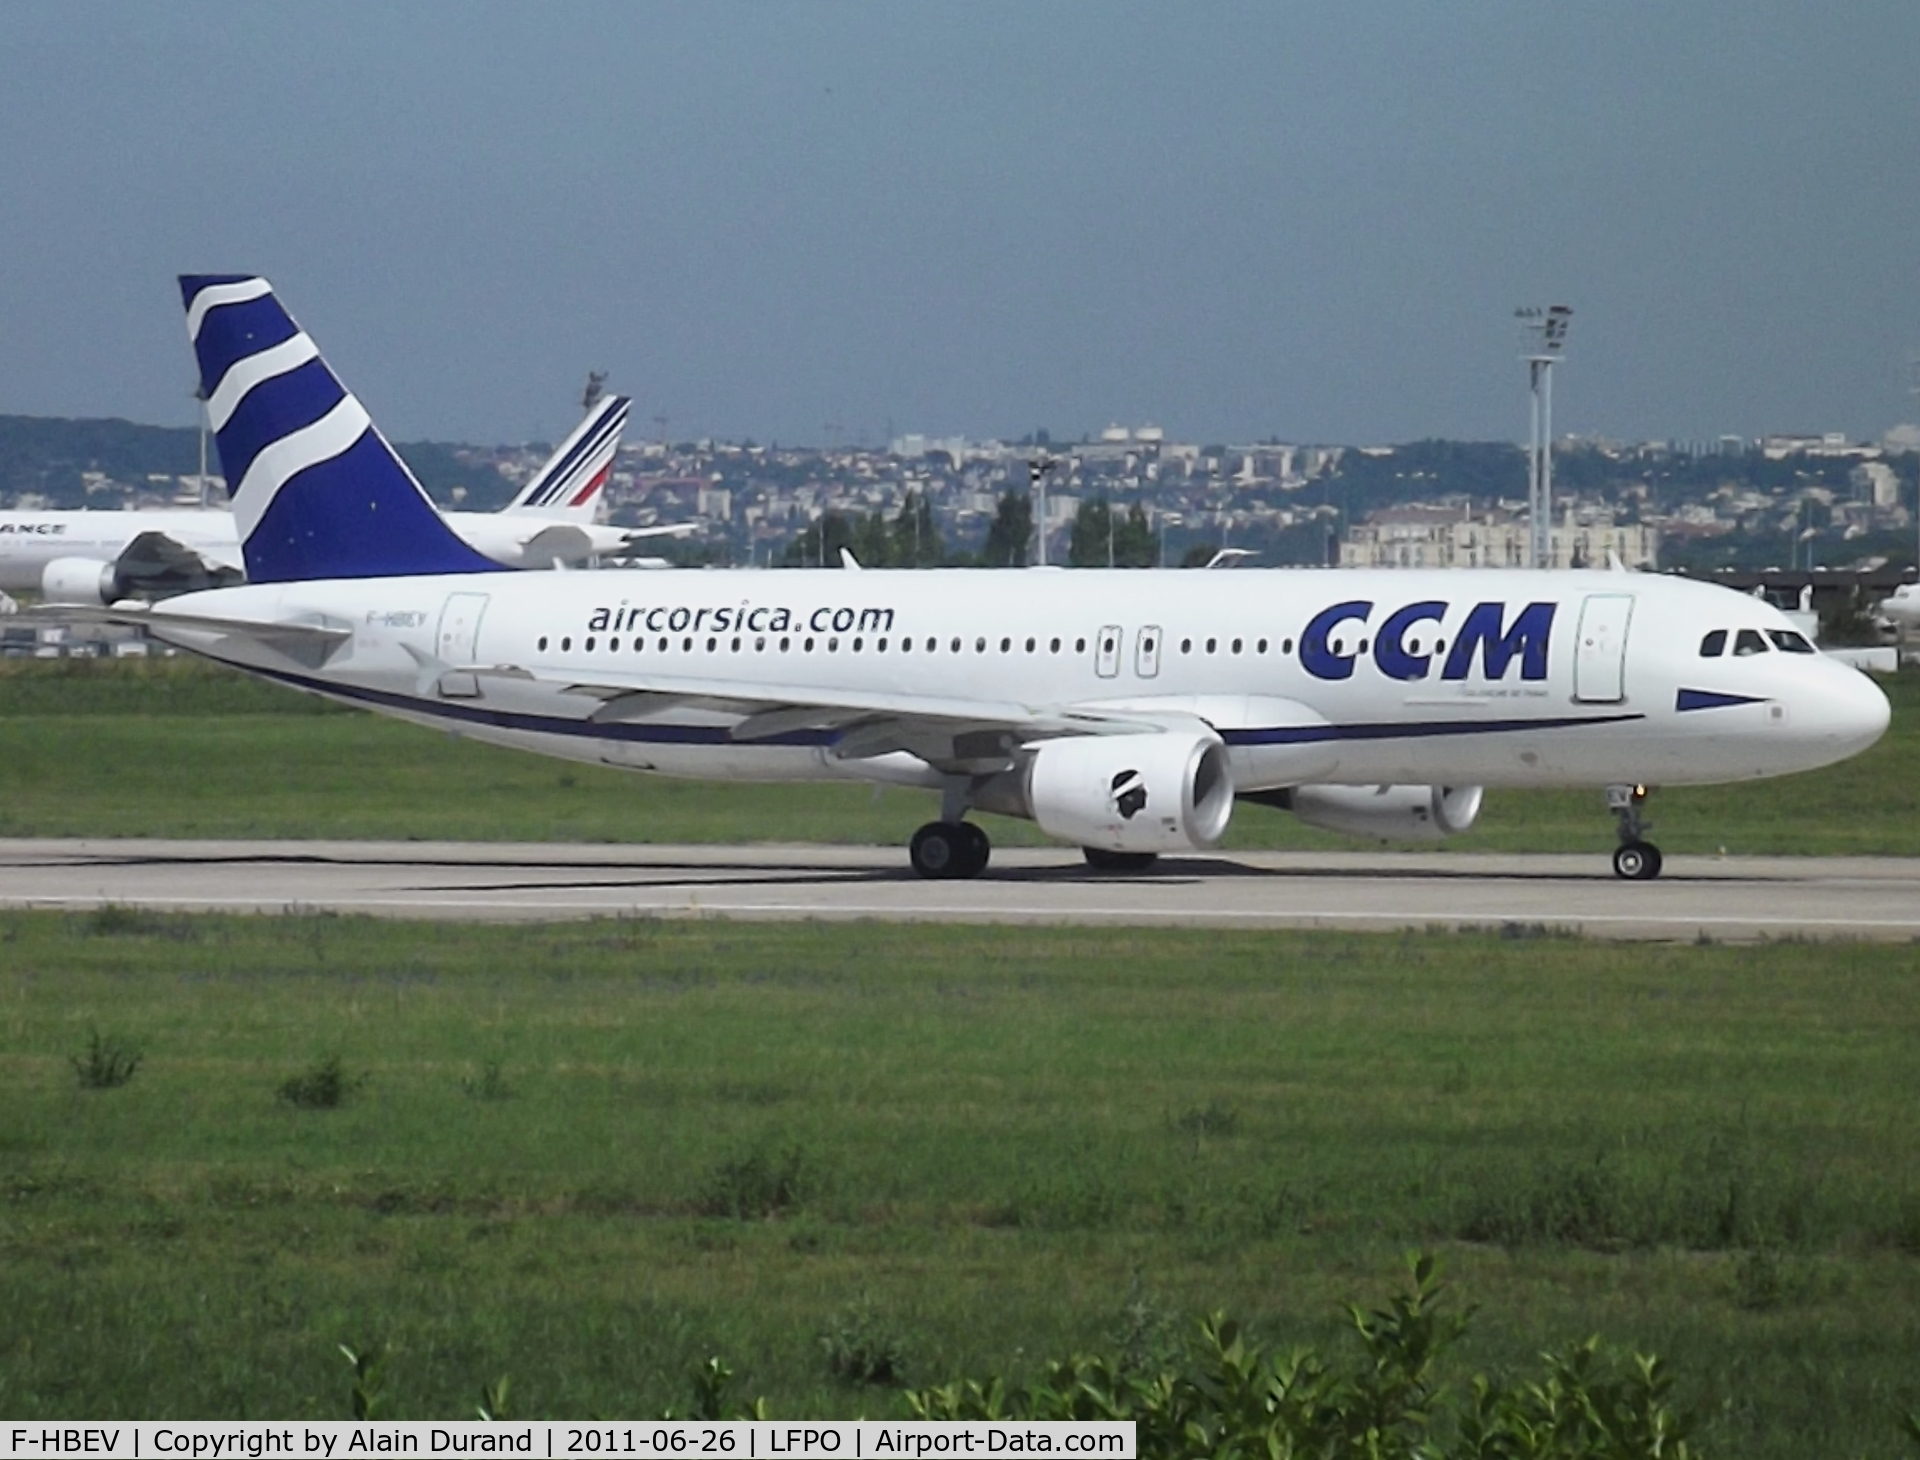 F-HBEV, 2009 Airbus A320-214 C/N 3952, CCM Air Corsica operates a pair of A319s and a pair of A320s along with seven ATR 72s on routes linking AJA, BIA and CLY with points across continental France and Europe